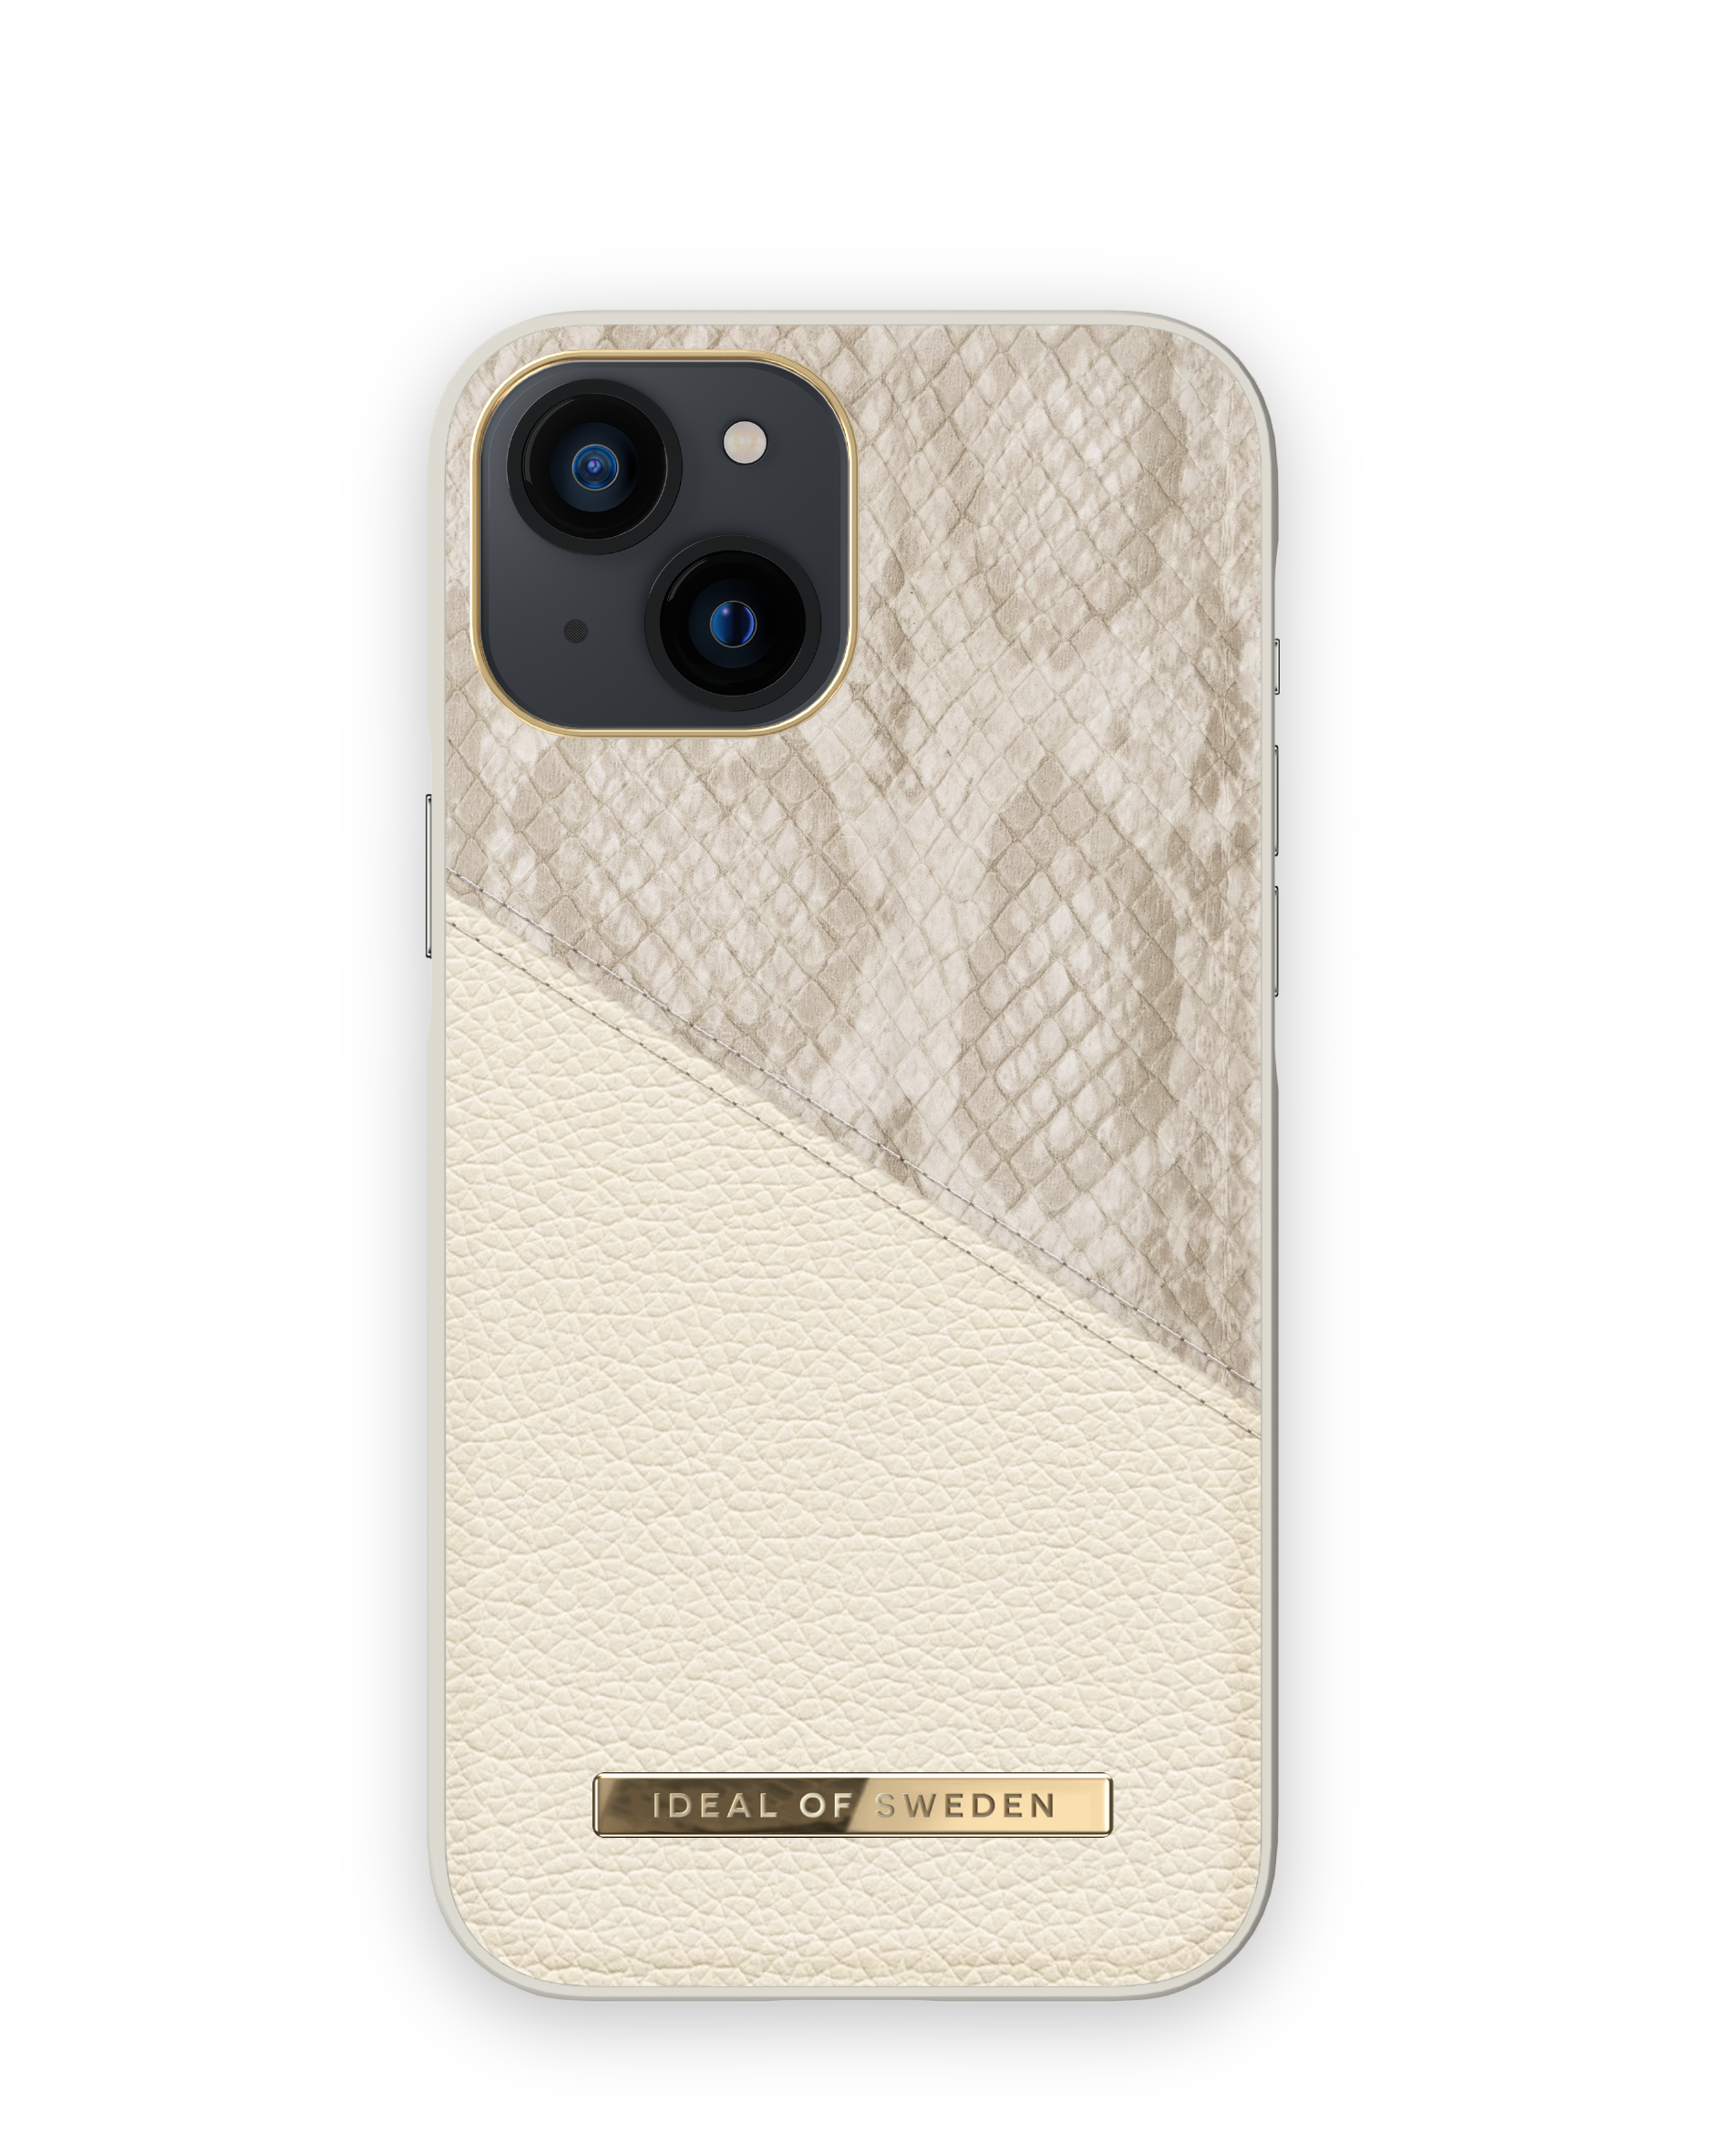 Backcover, 13 Pearl IDACSS20-I2154-200, Mini, Python IDEAL SWEDEN iPhone OF Apple,